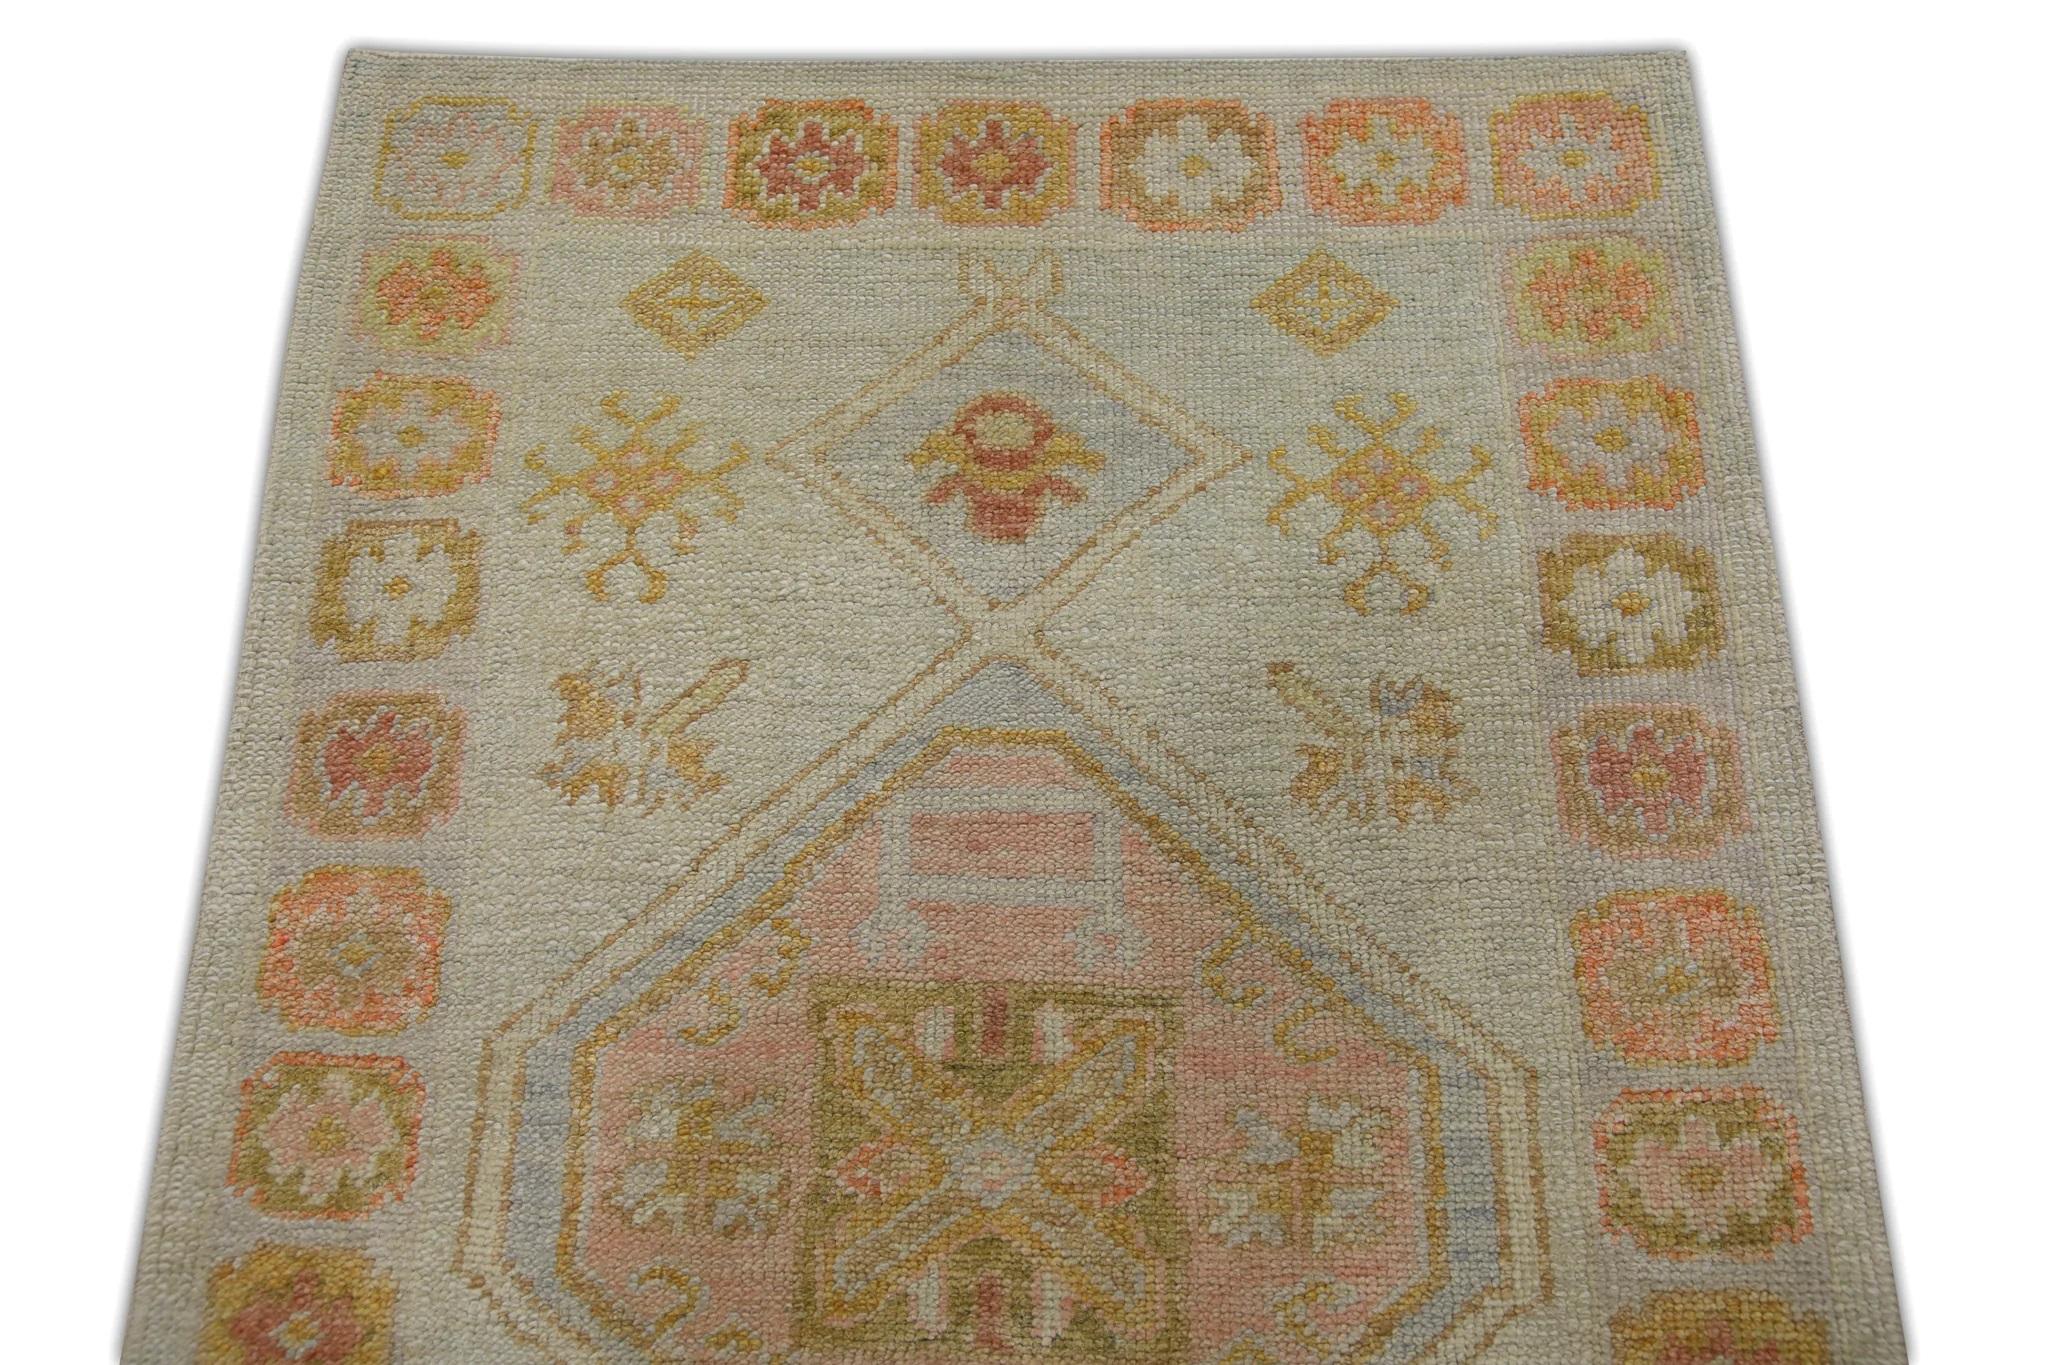 Vegetable Dyed Blue Handwoven Wool Turkish Oushak Rug in Colorful Medallion Pattern 3' x 7'9